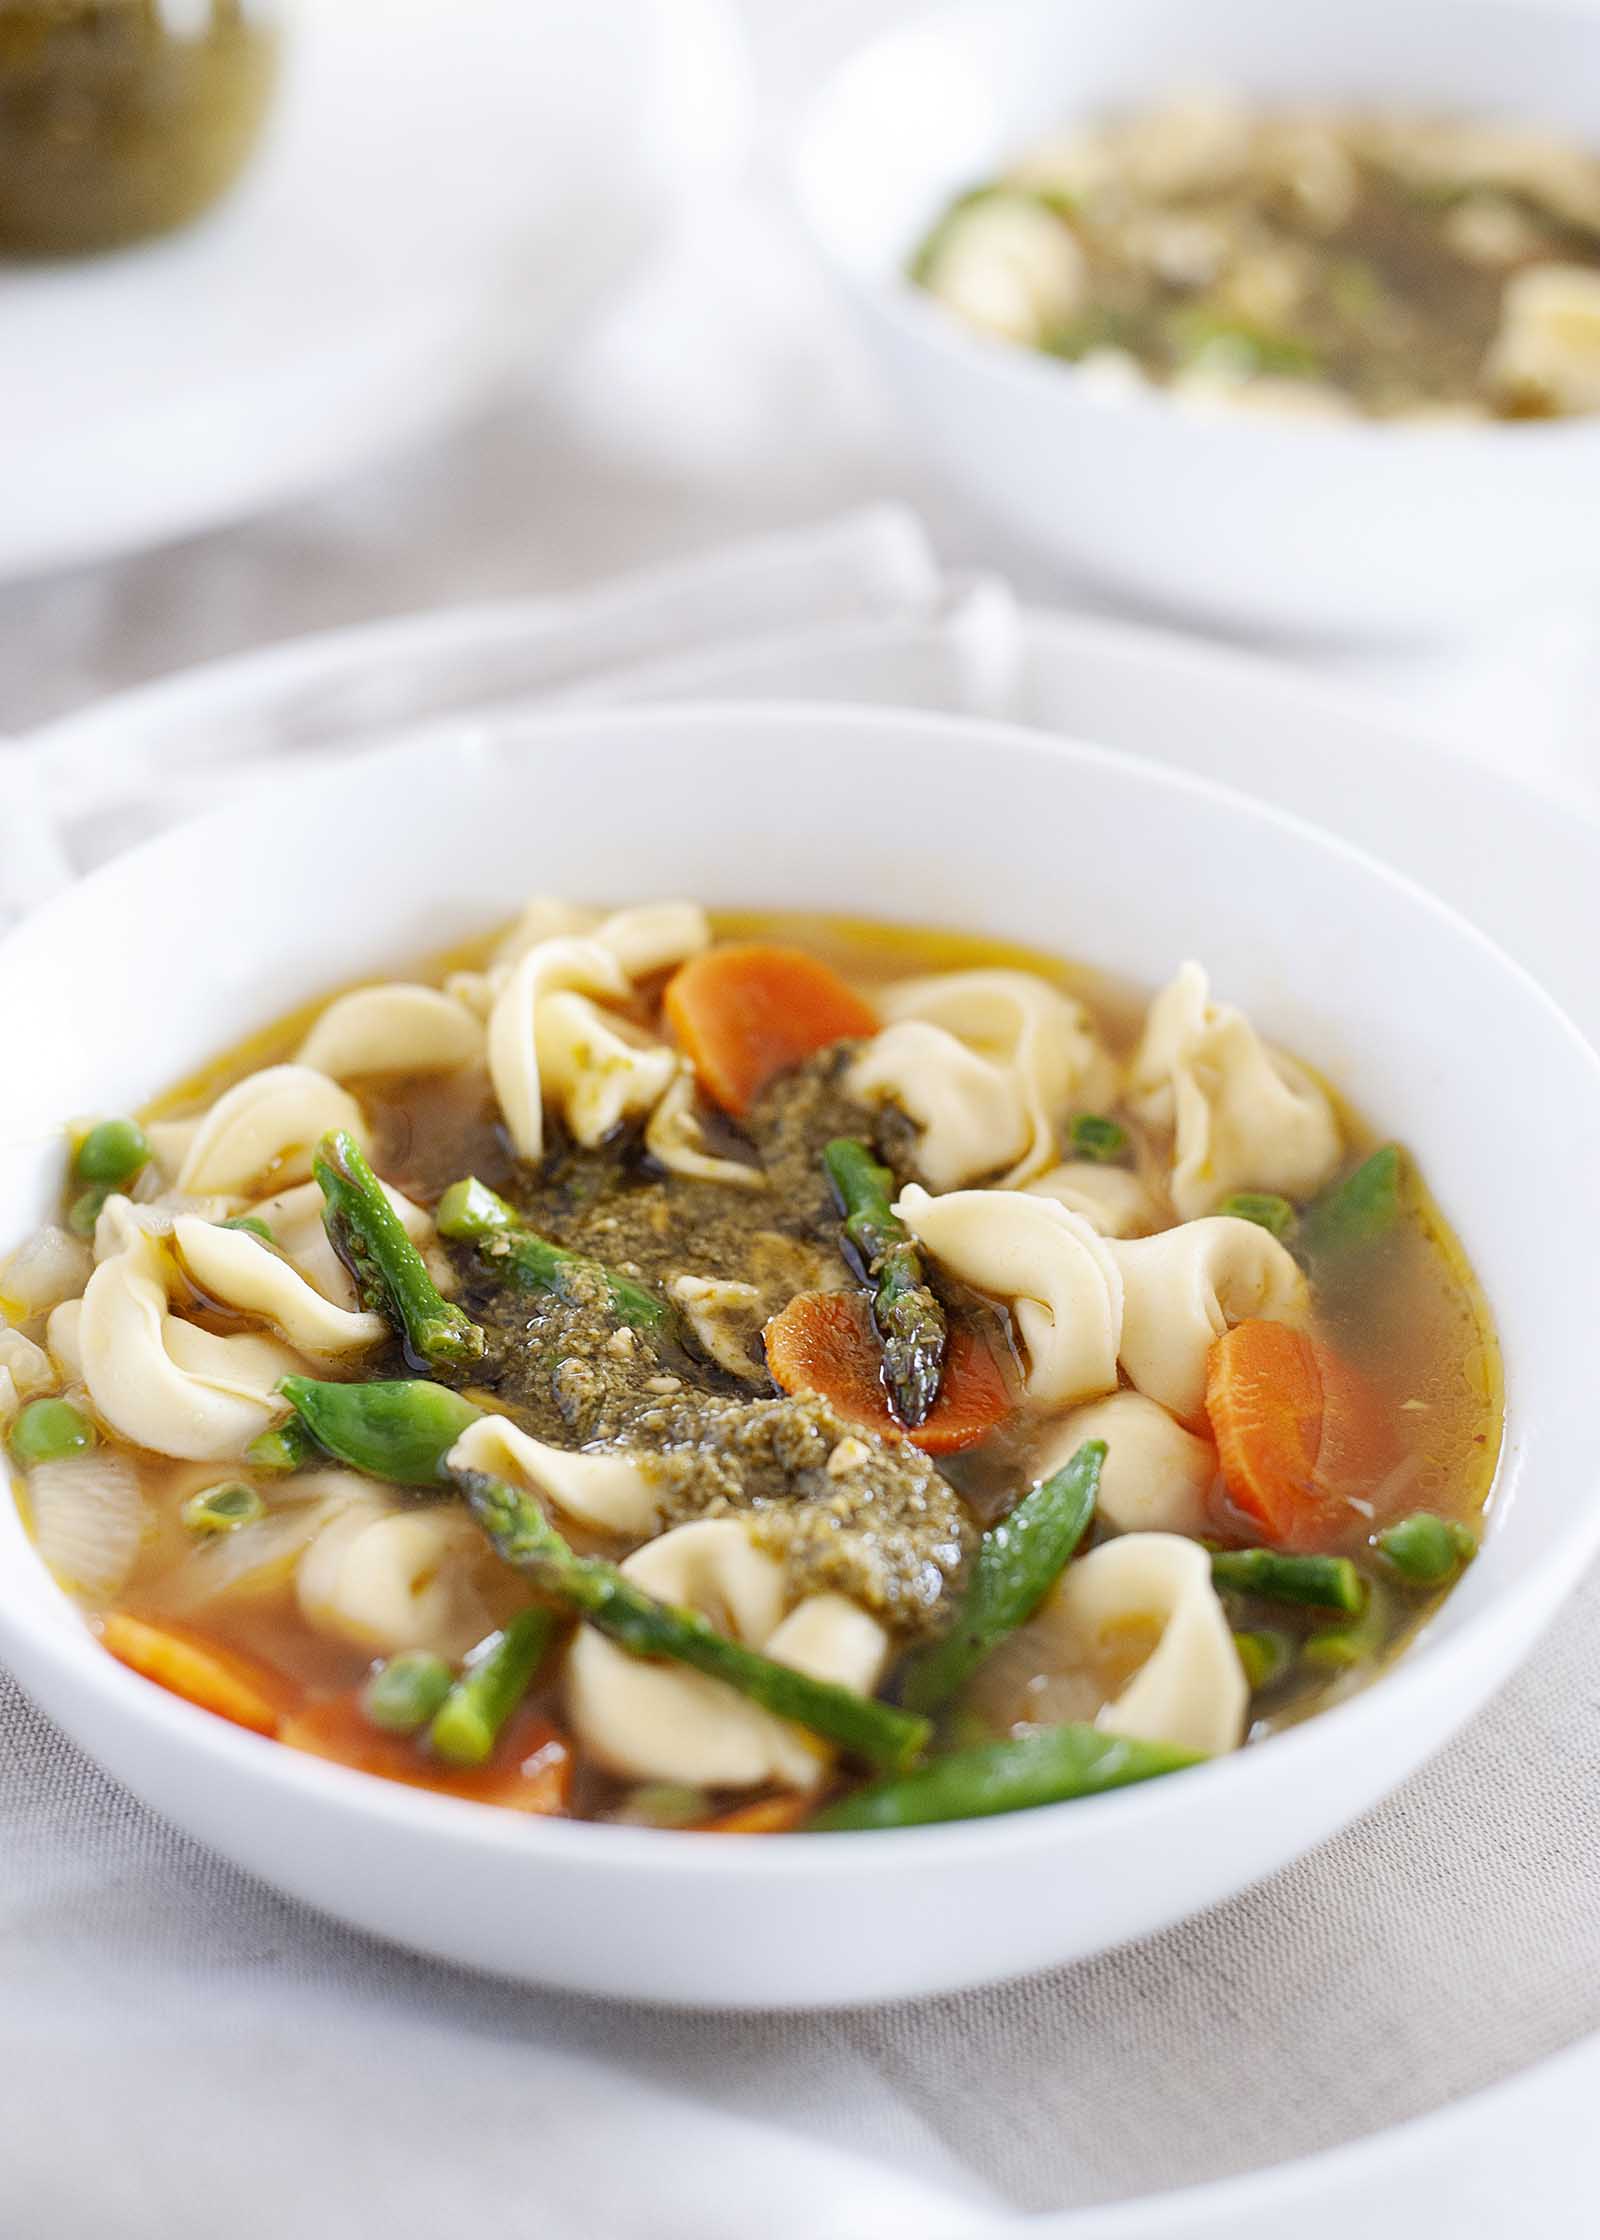 Bowl of vegetarian soup with tortellini in a white bowl on a table with a second bowl in the background. Chopped asparagus, sliced carrots and pesto are visible with the tortellini.